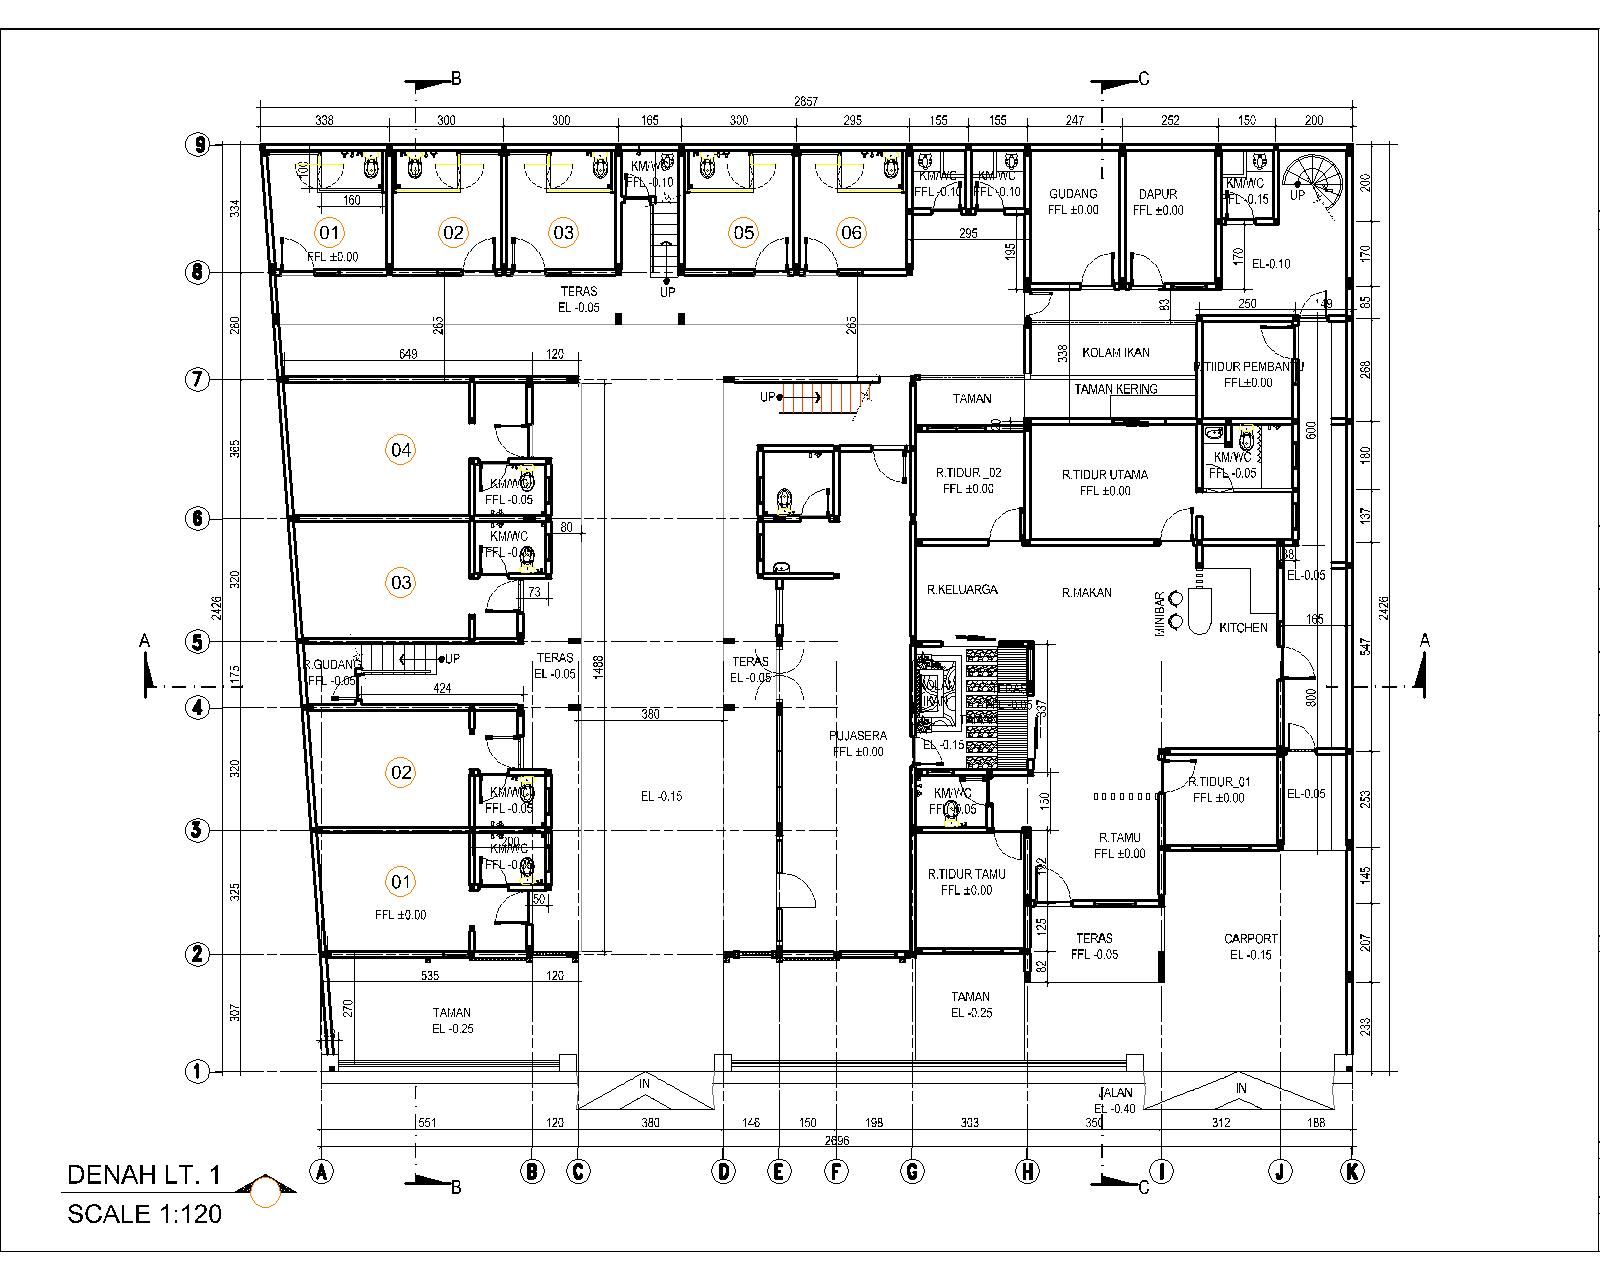 AutoCAD Drafter from fajaragus